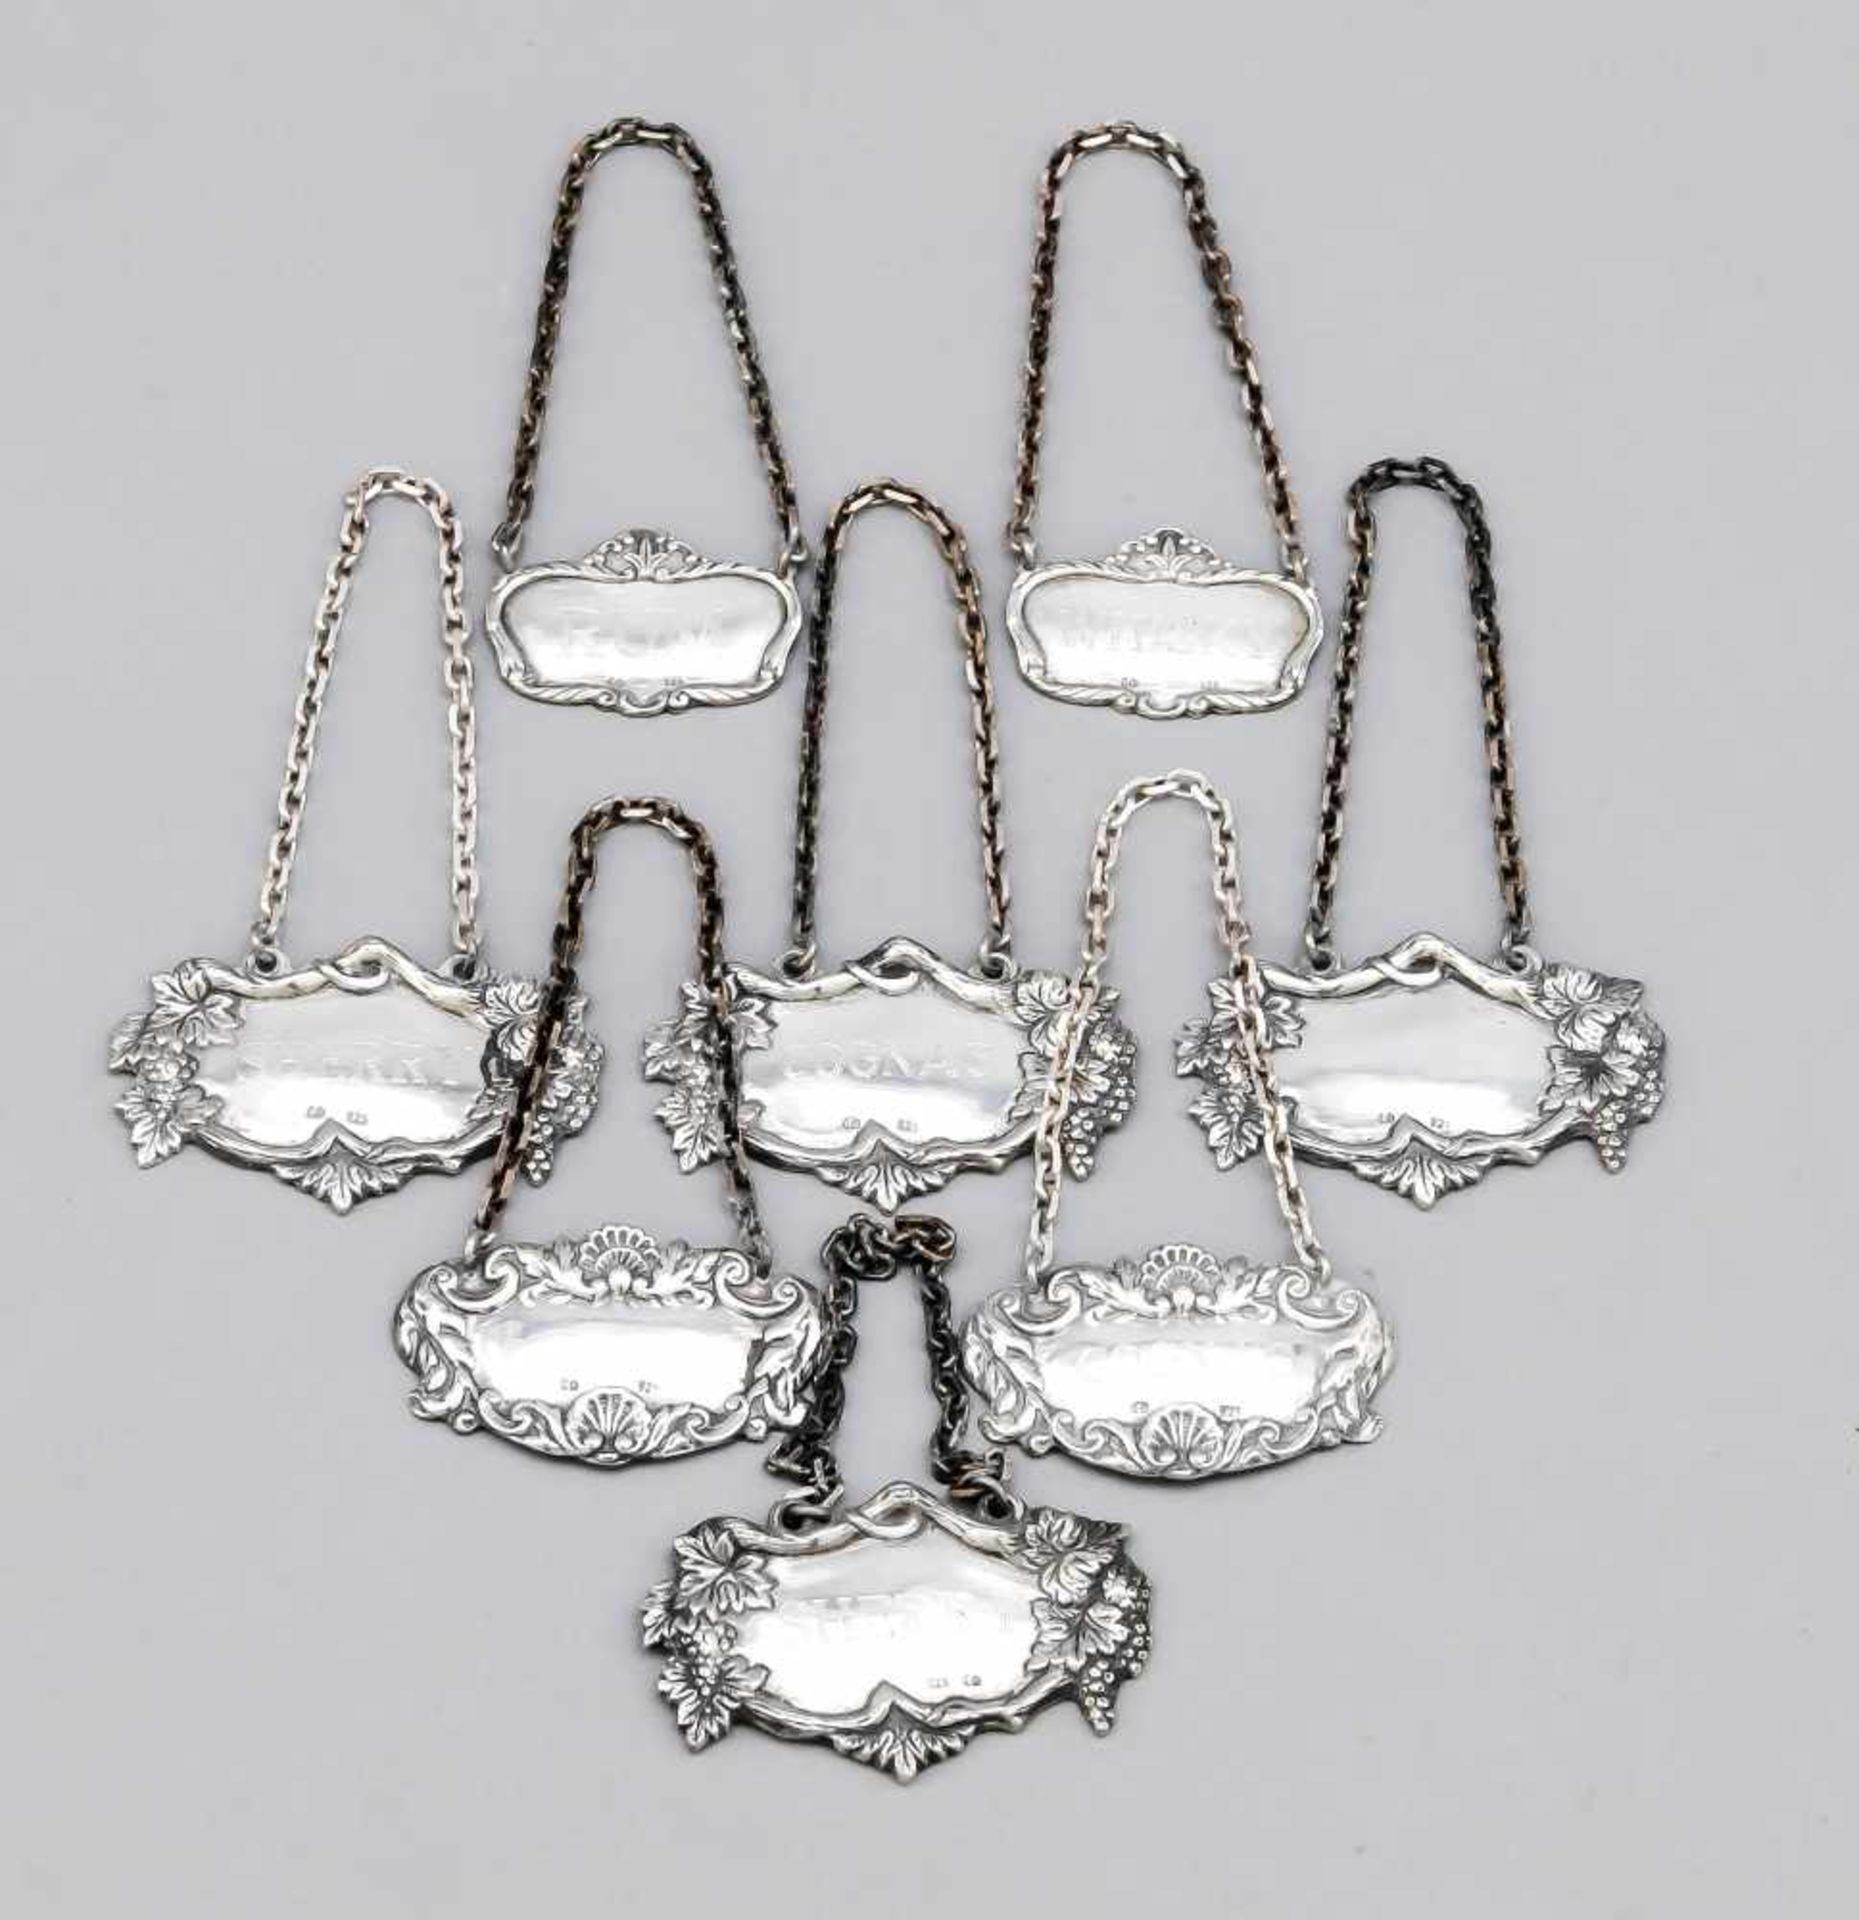 Eight bottle labels, German, 20th century, Sterling silver 925/000, different shapes and